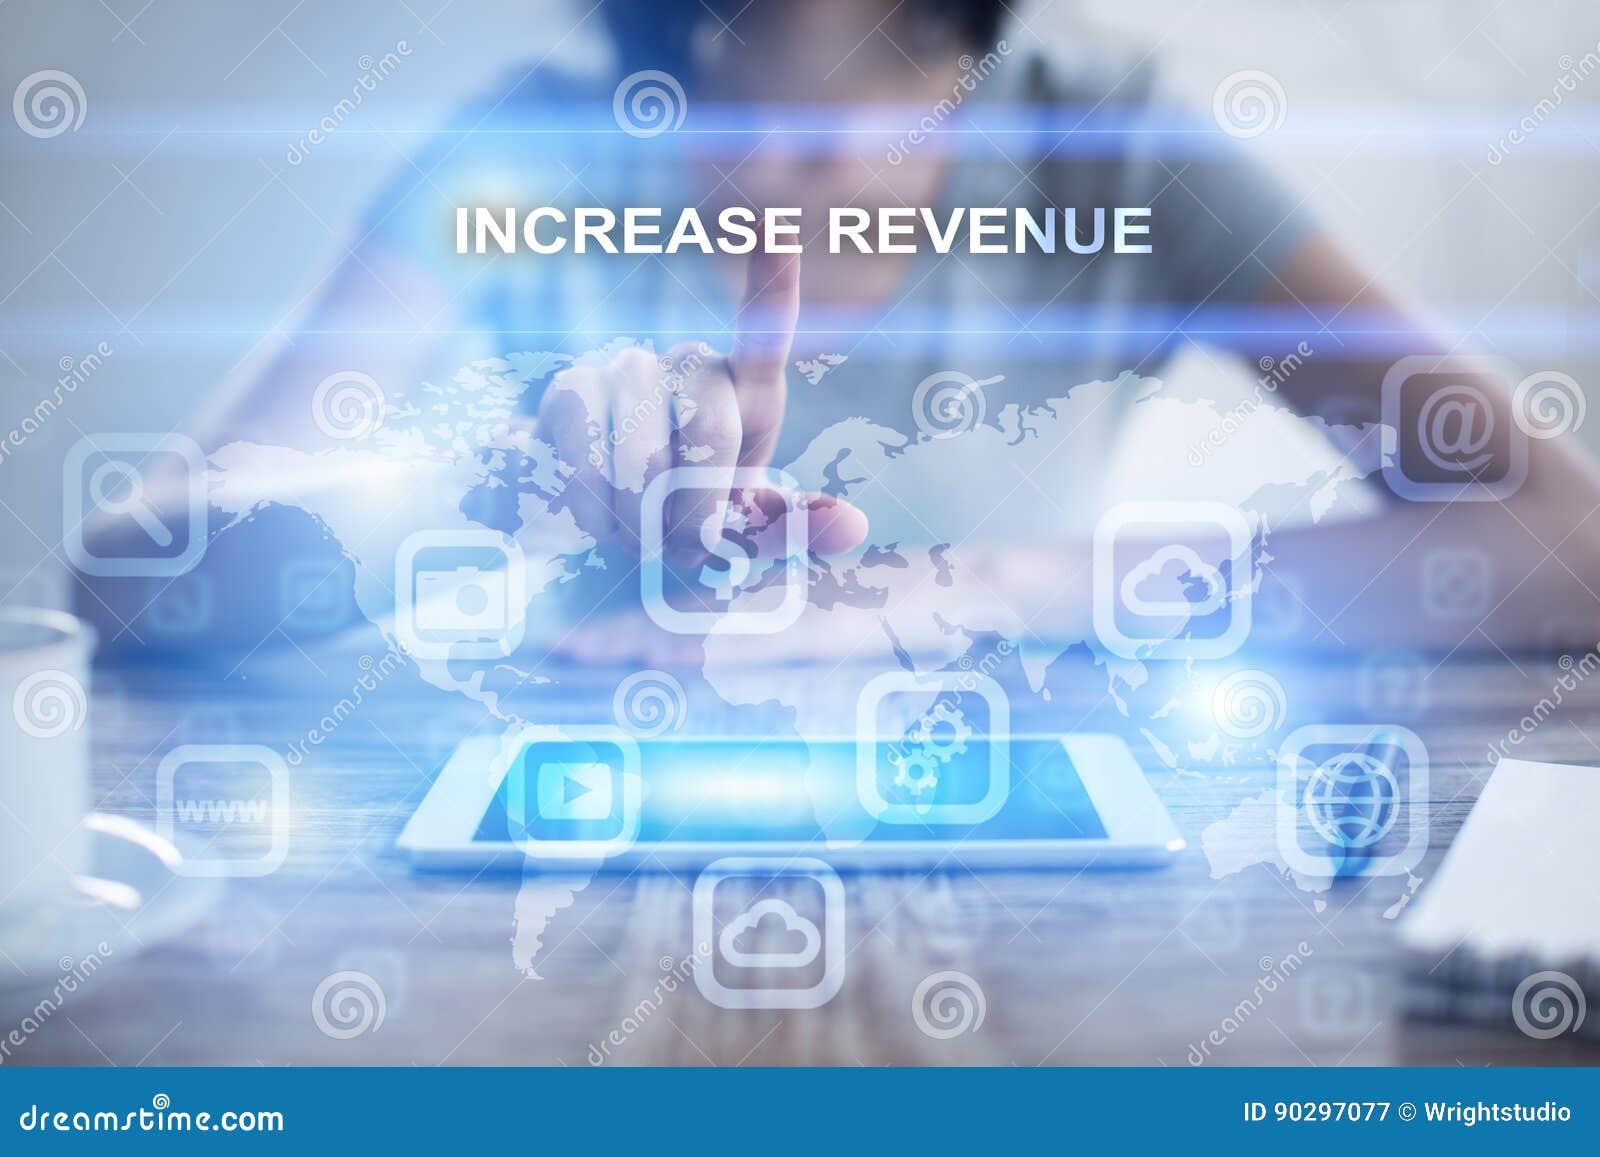 woman using tablet pc, pressing on virtual screen and selecting increase revenue